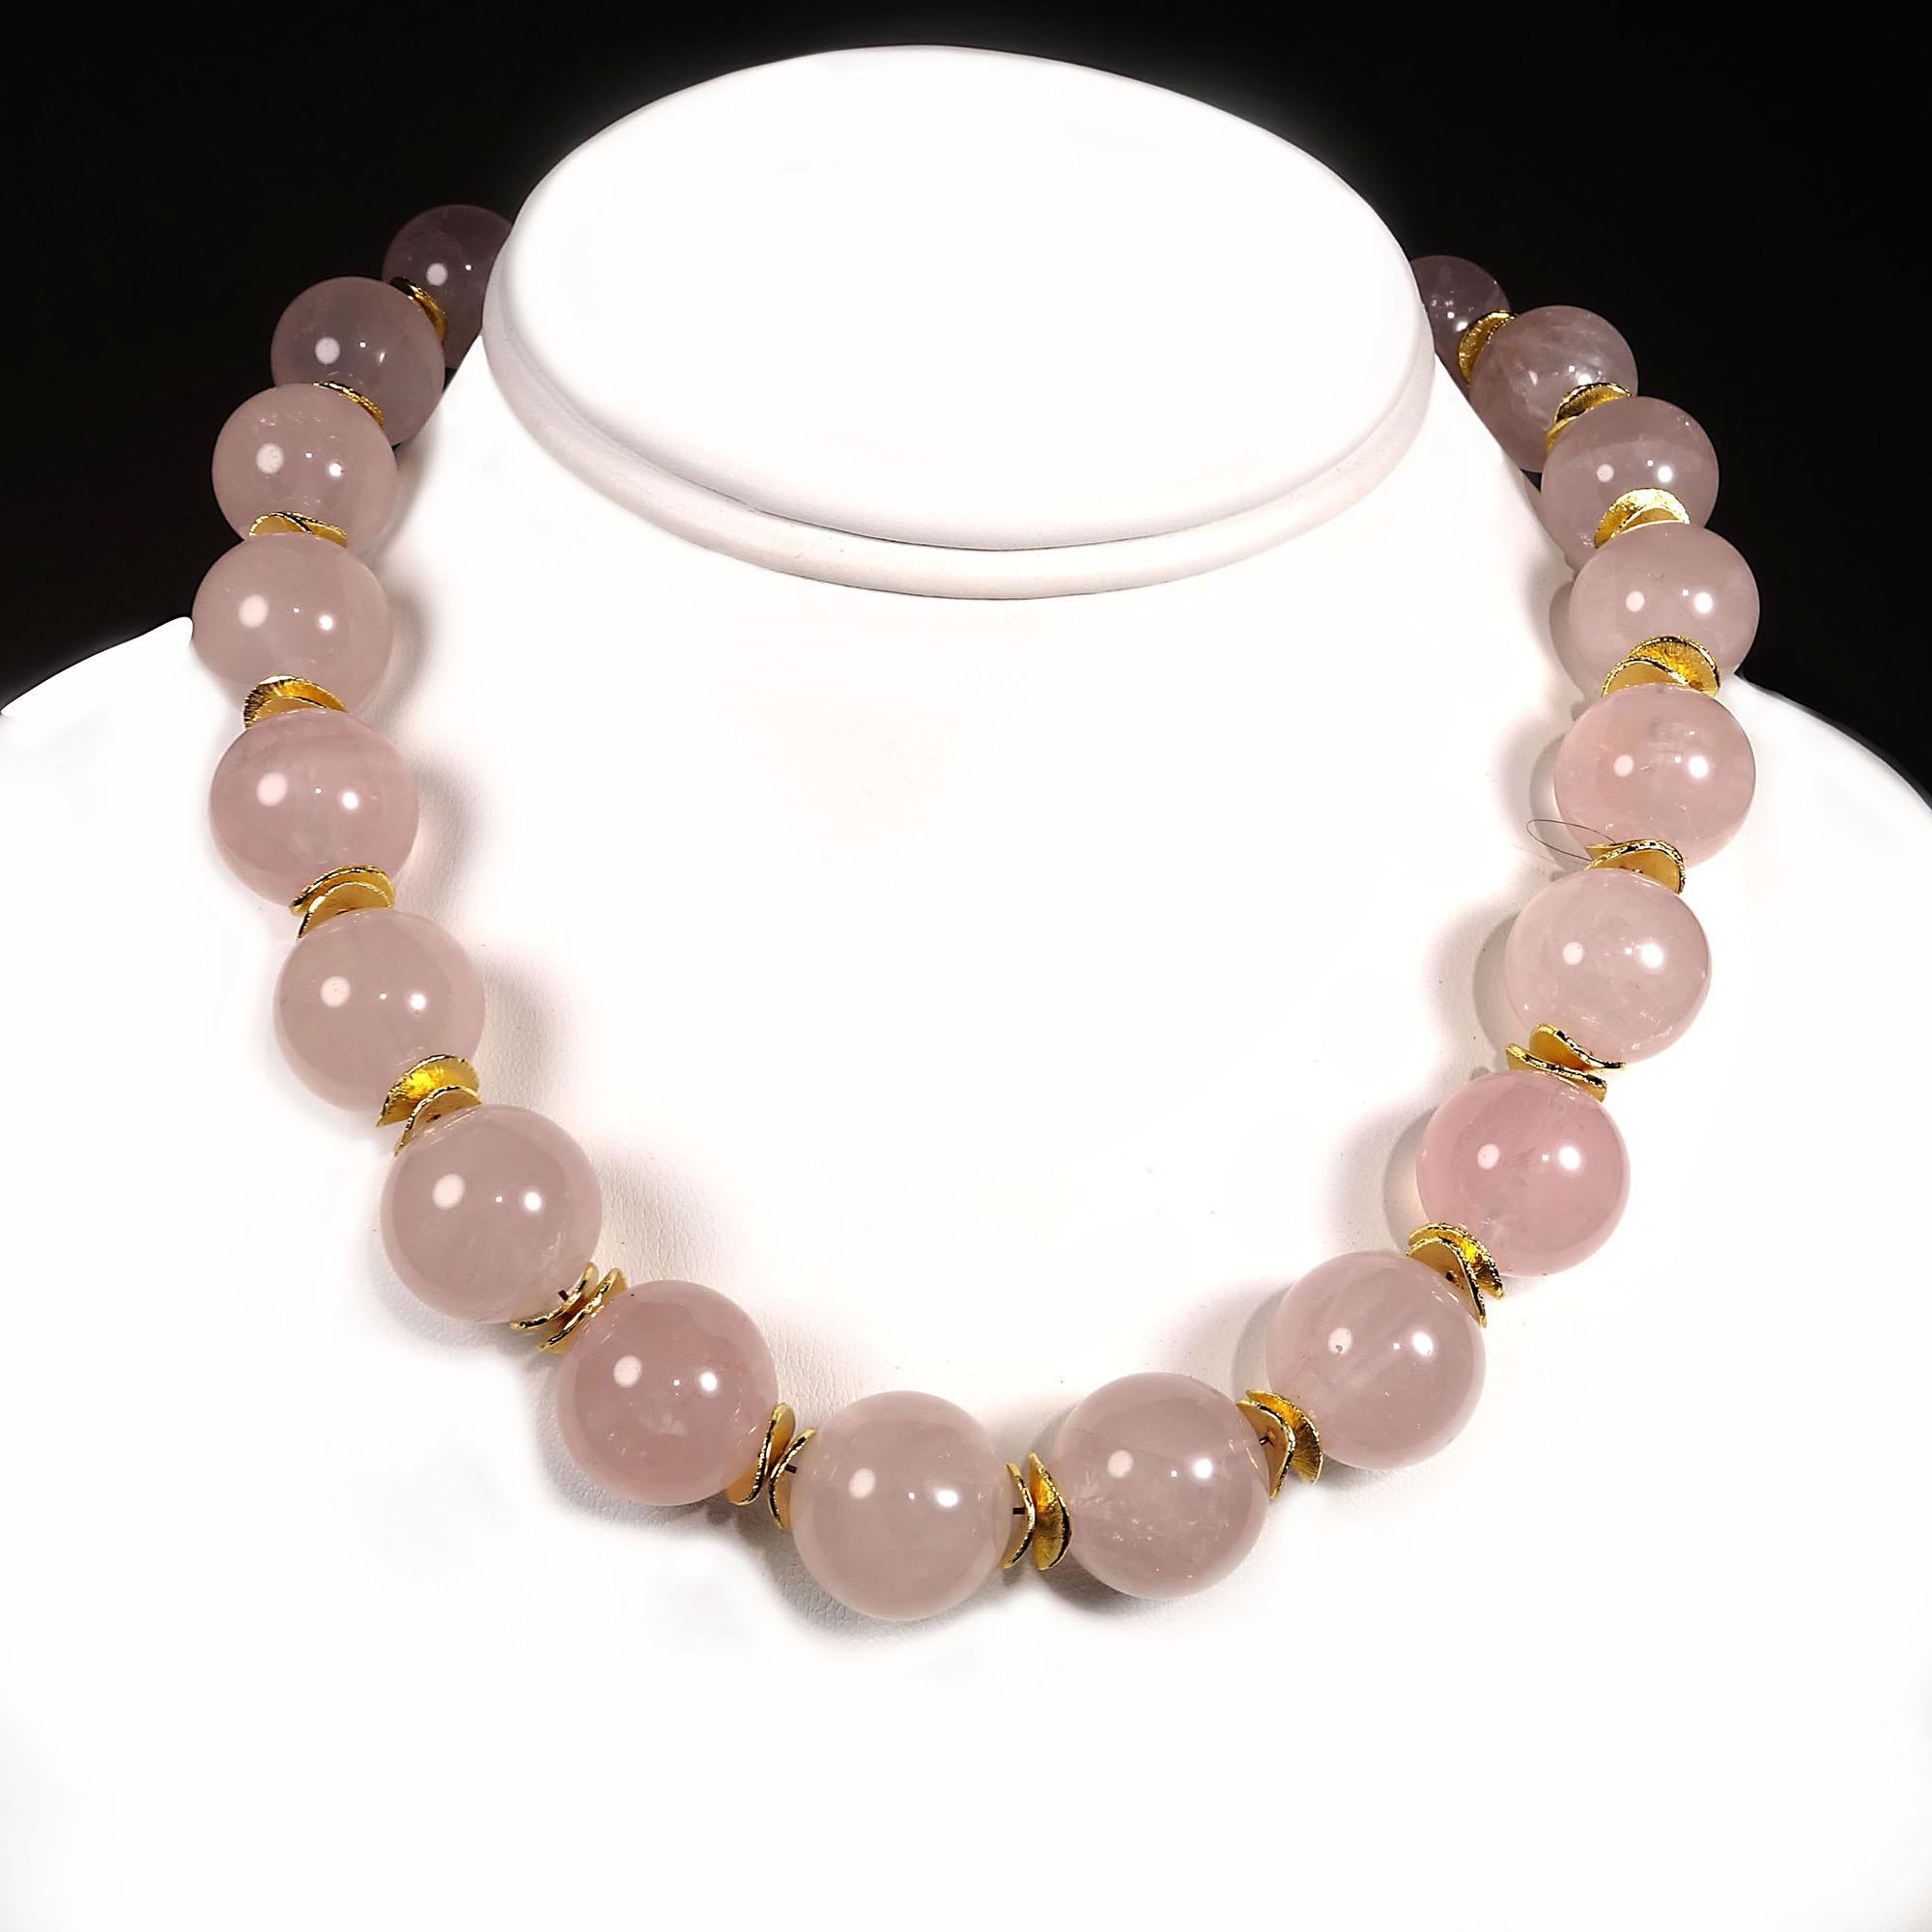 Glowing translucent Rose Quartz enhanced with gold tone flutters choker.  This 16 inch choker necklace is handmade and features a 24K satin vermeil toggle clasp.  This lovely Rose Quartz Choker caresses your neck and whispers 'Spring' in your ear!  